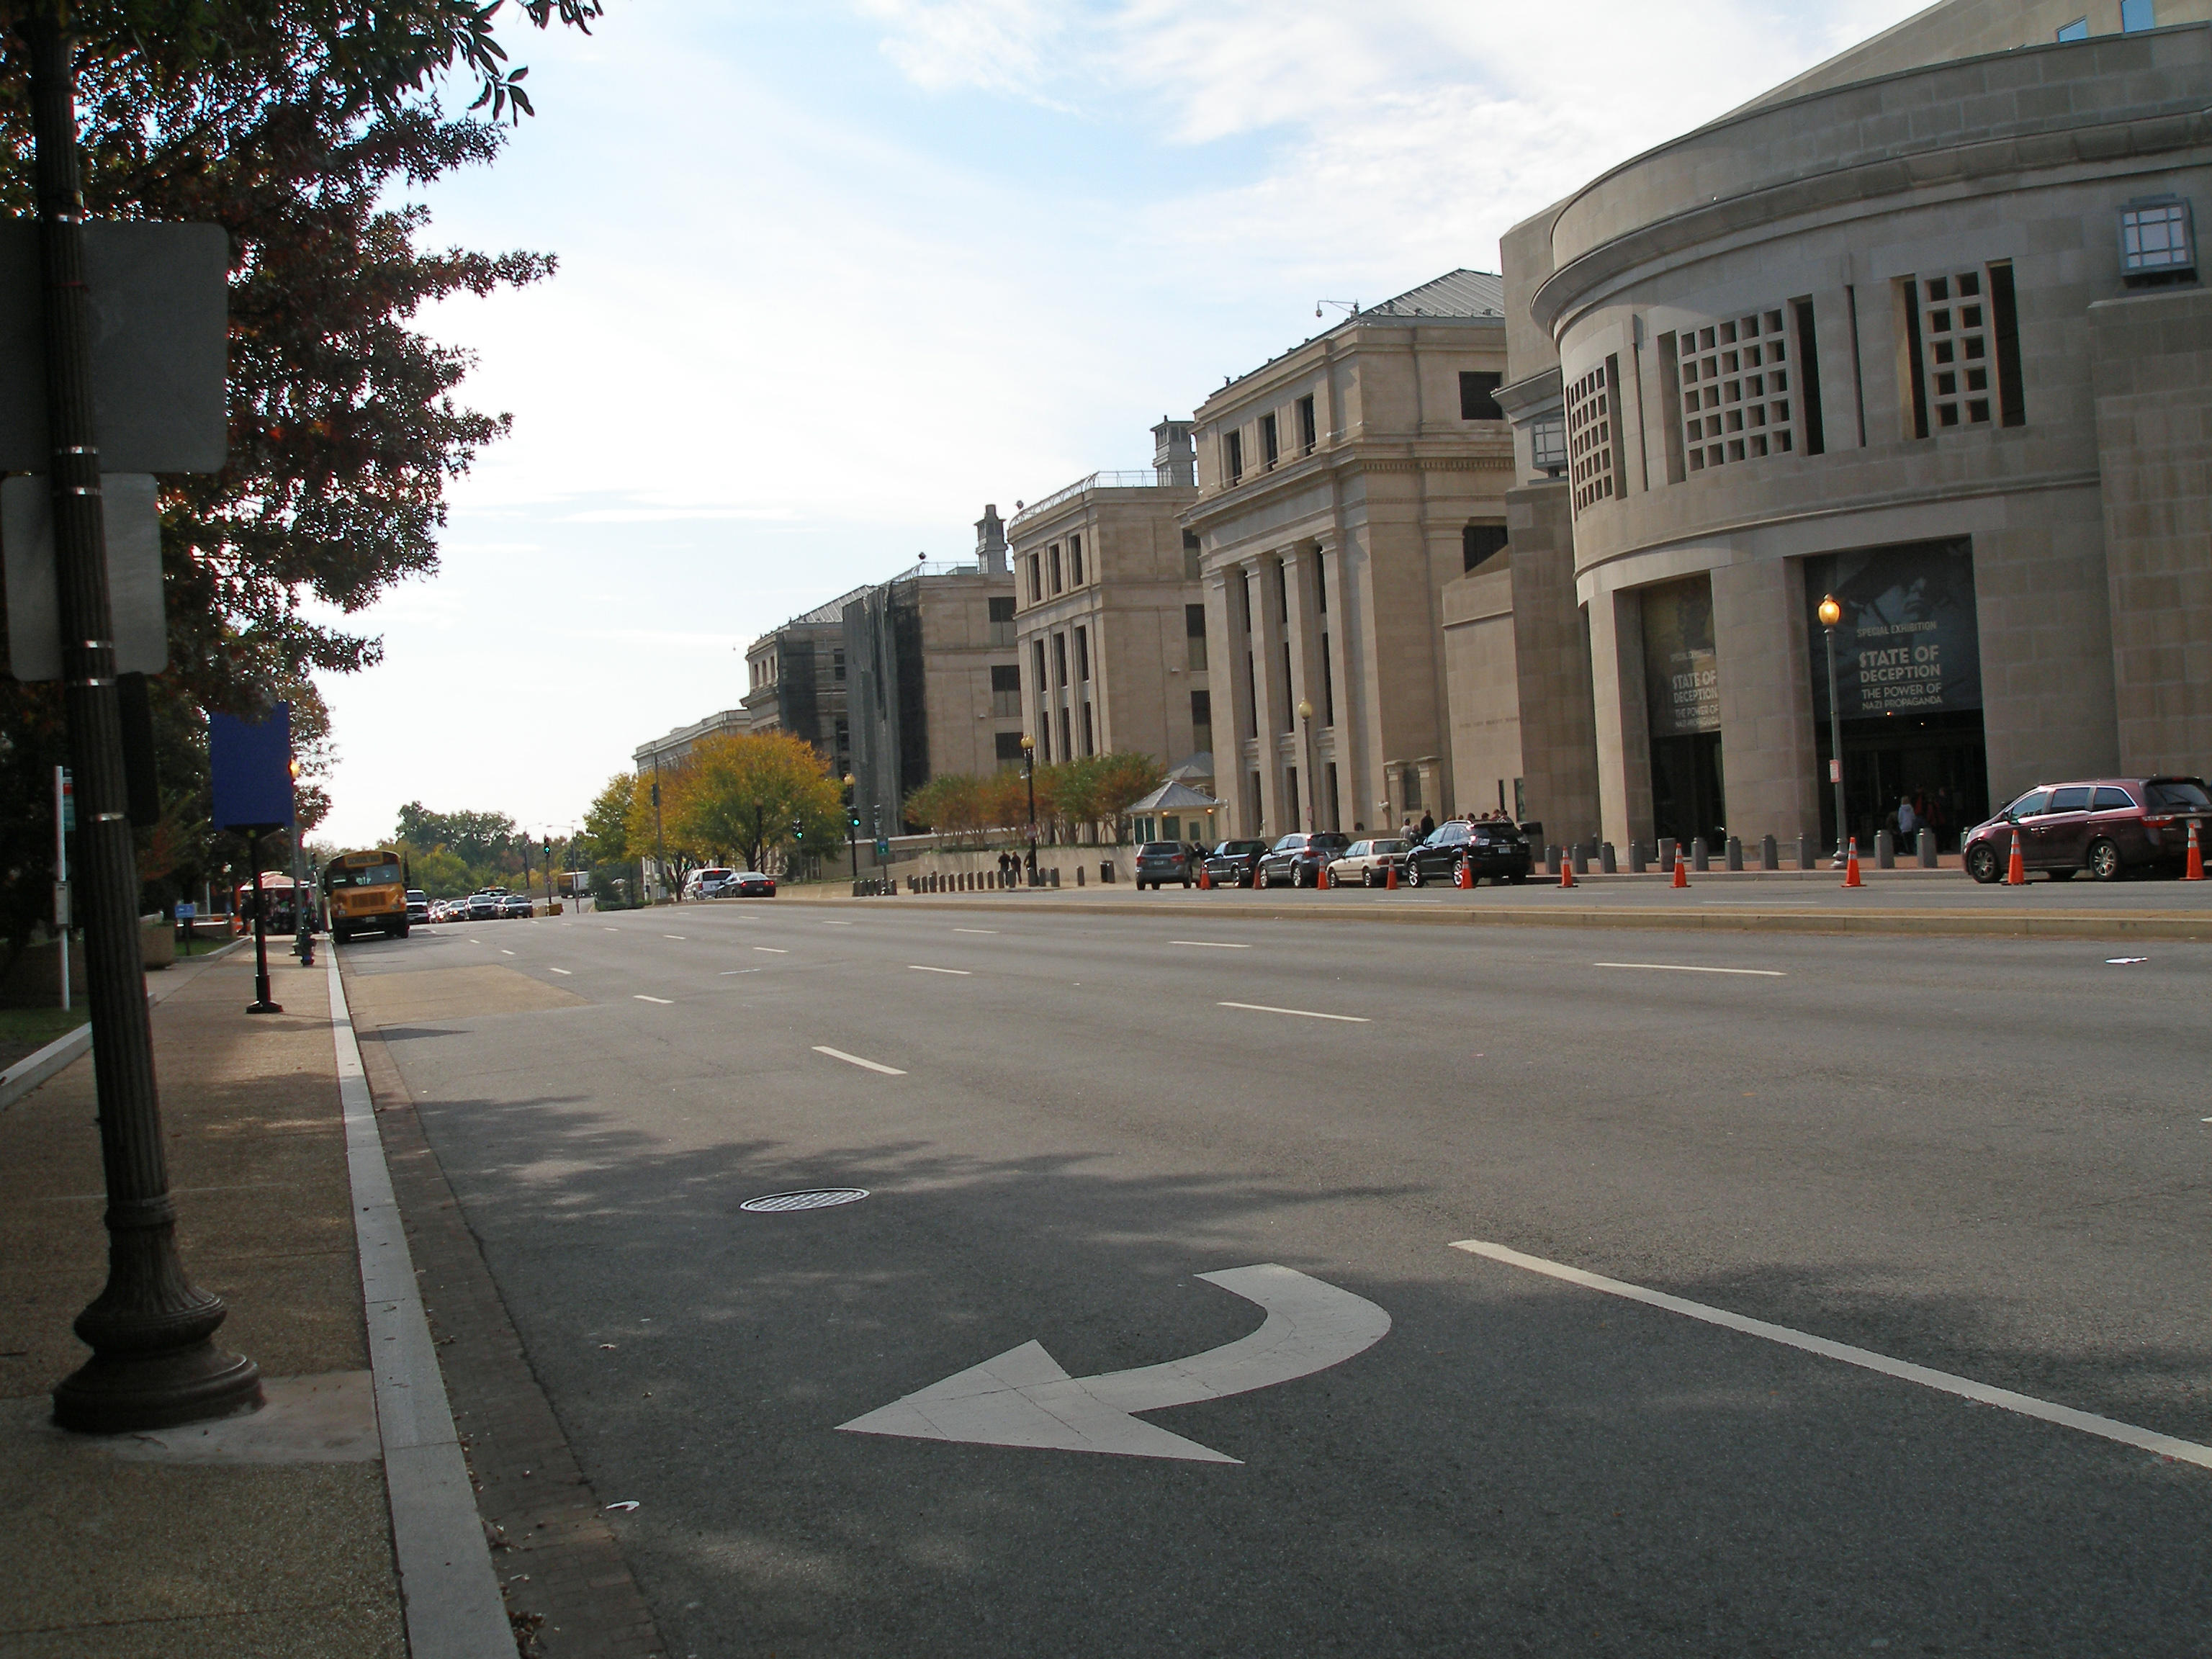 Looking South, 14th and Independence Ave. (US Hwy 1), Washington DC